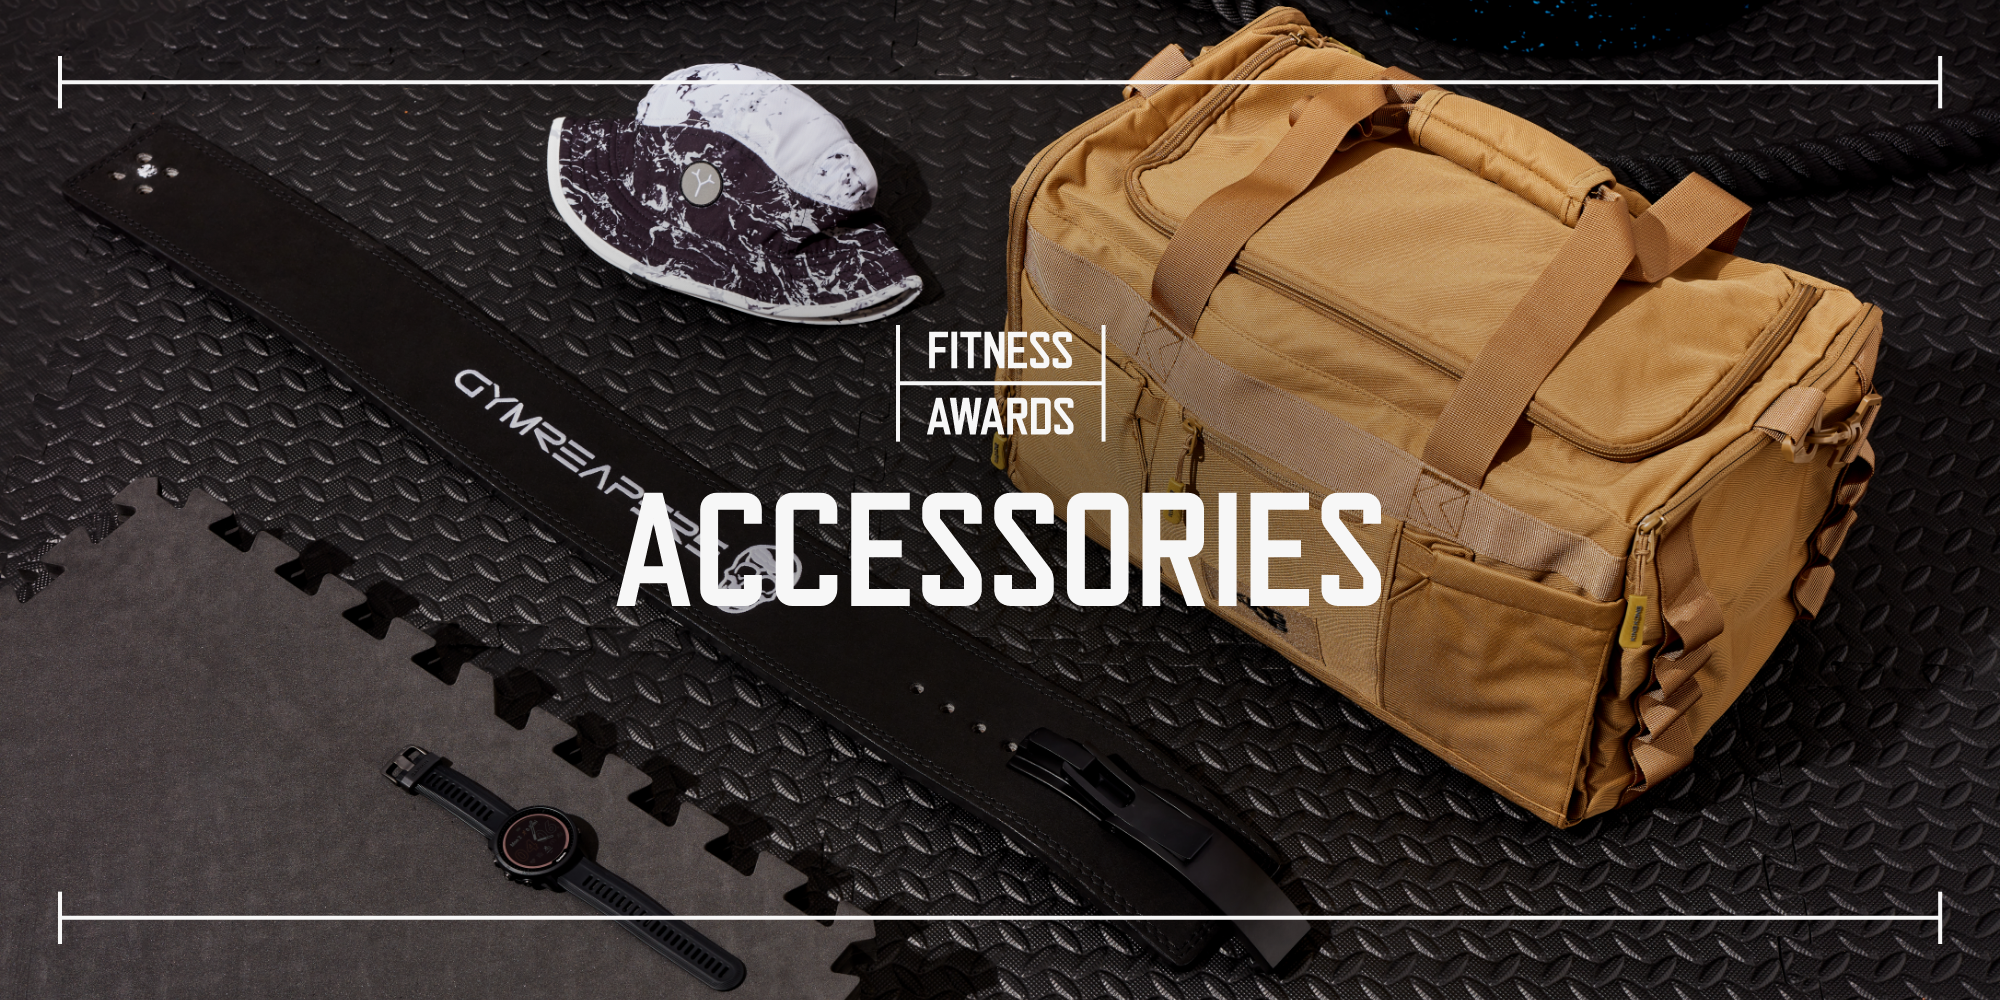 Ghost Fitness Accessories